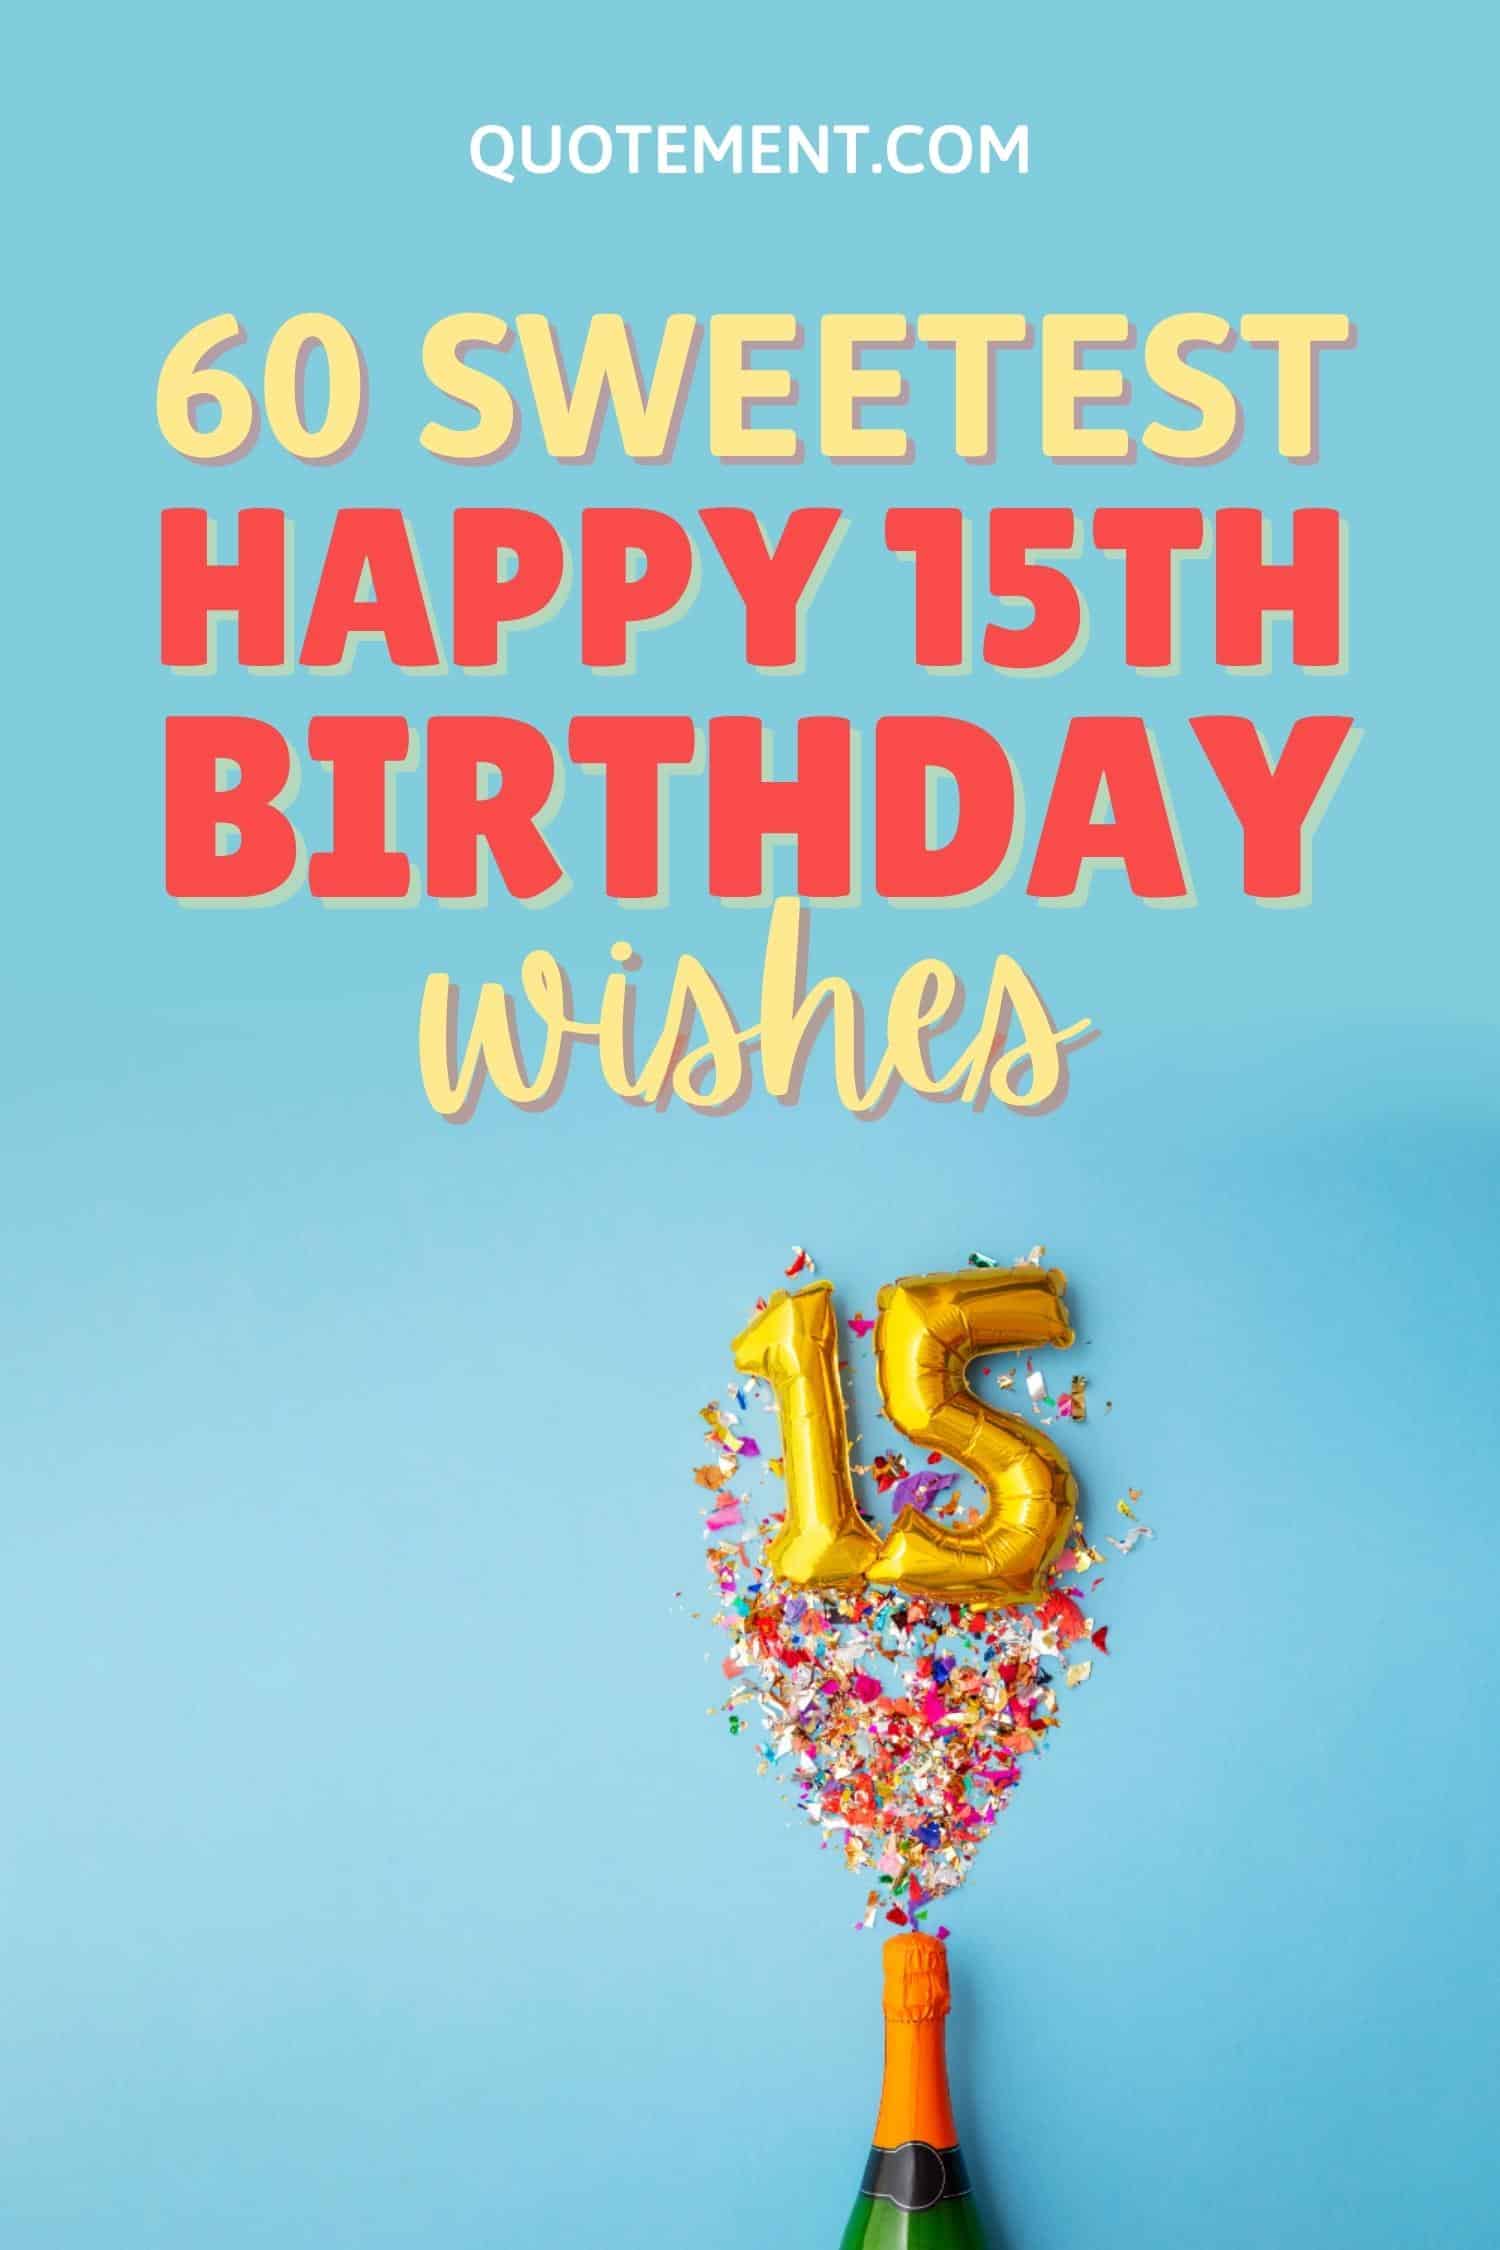 60 Sweet And Heart-Touching Happy 15th Birthday Wishes